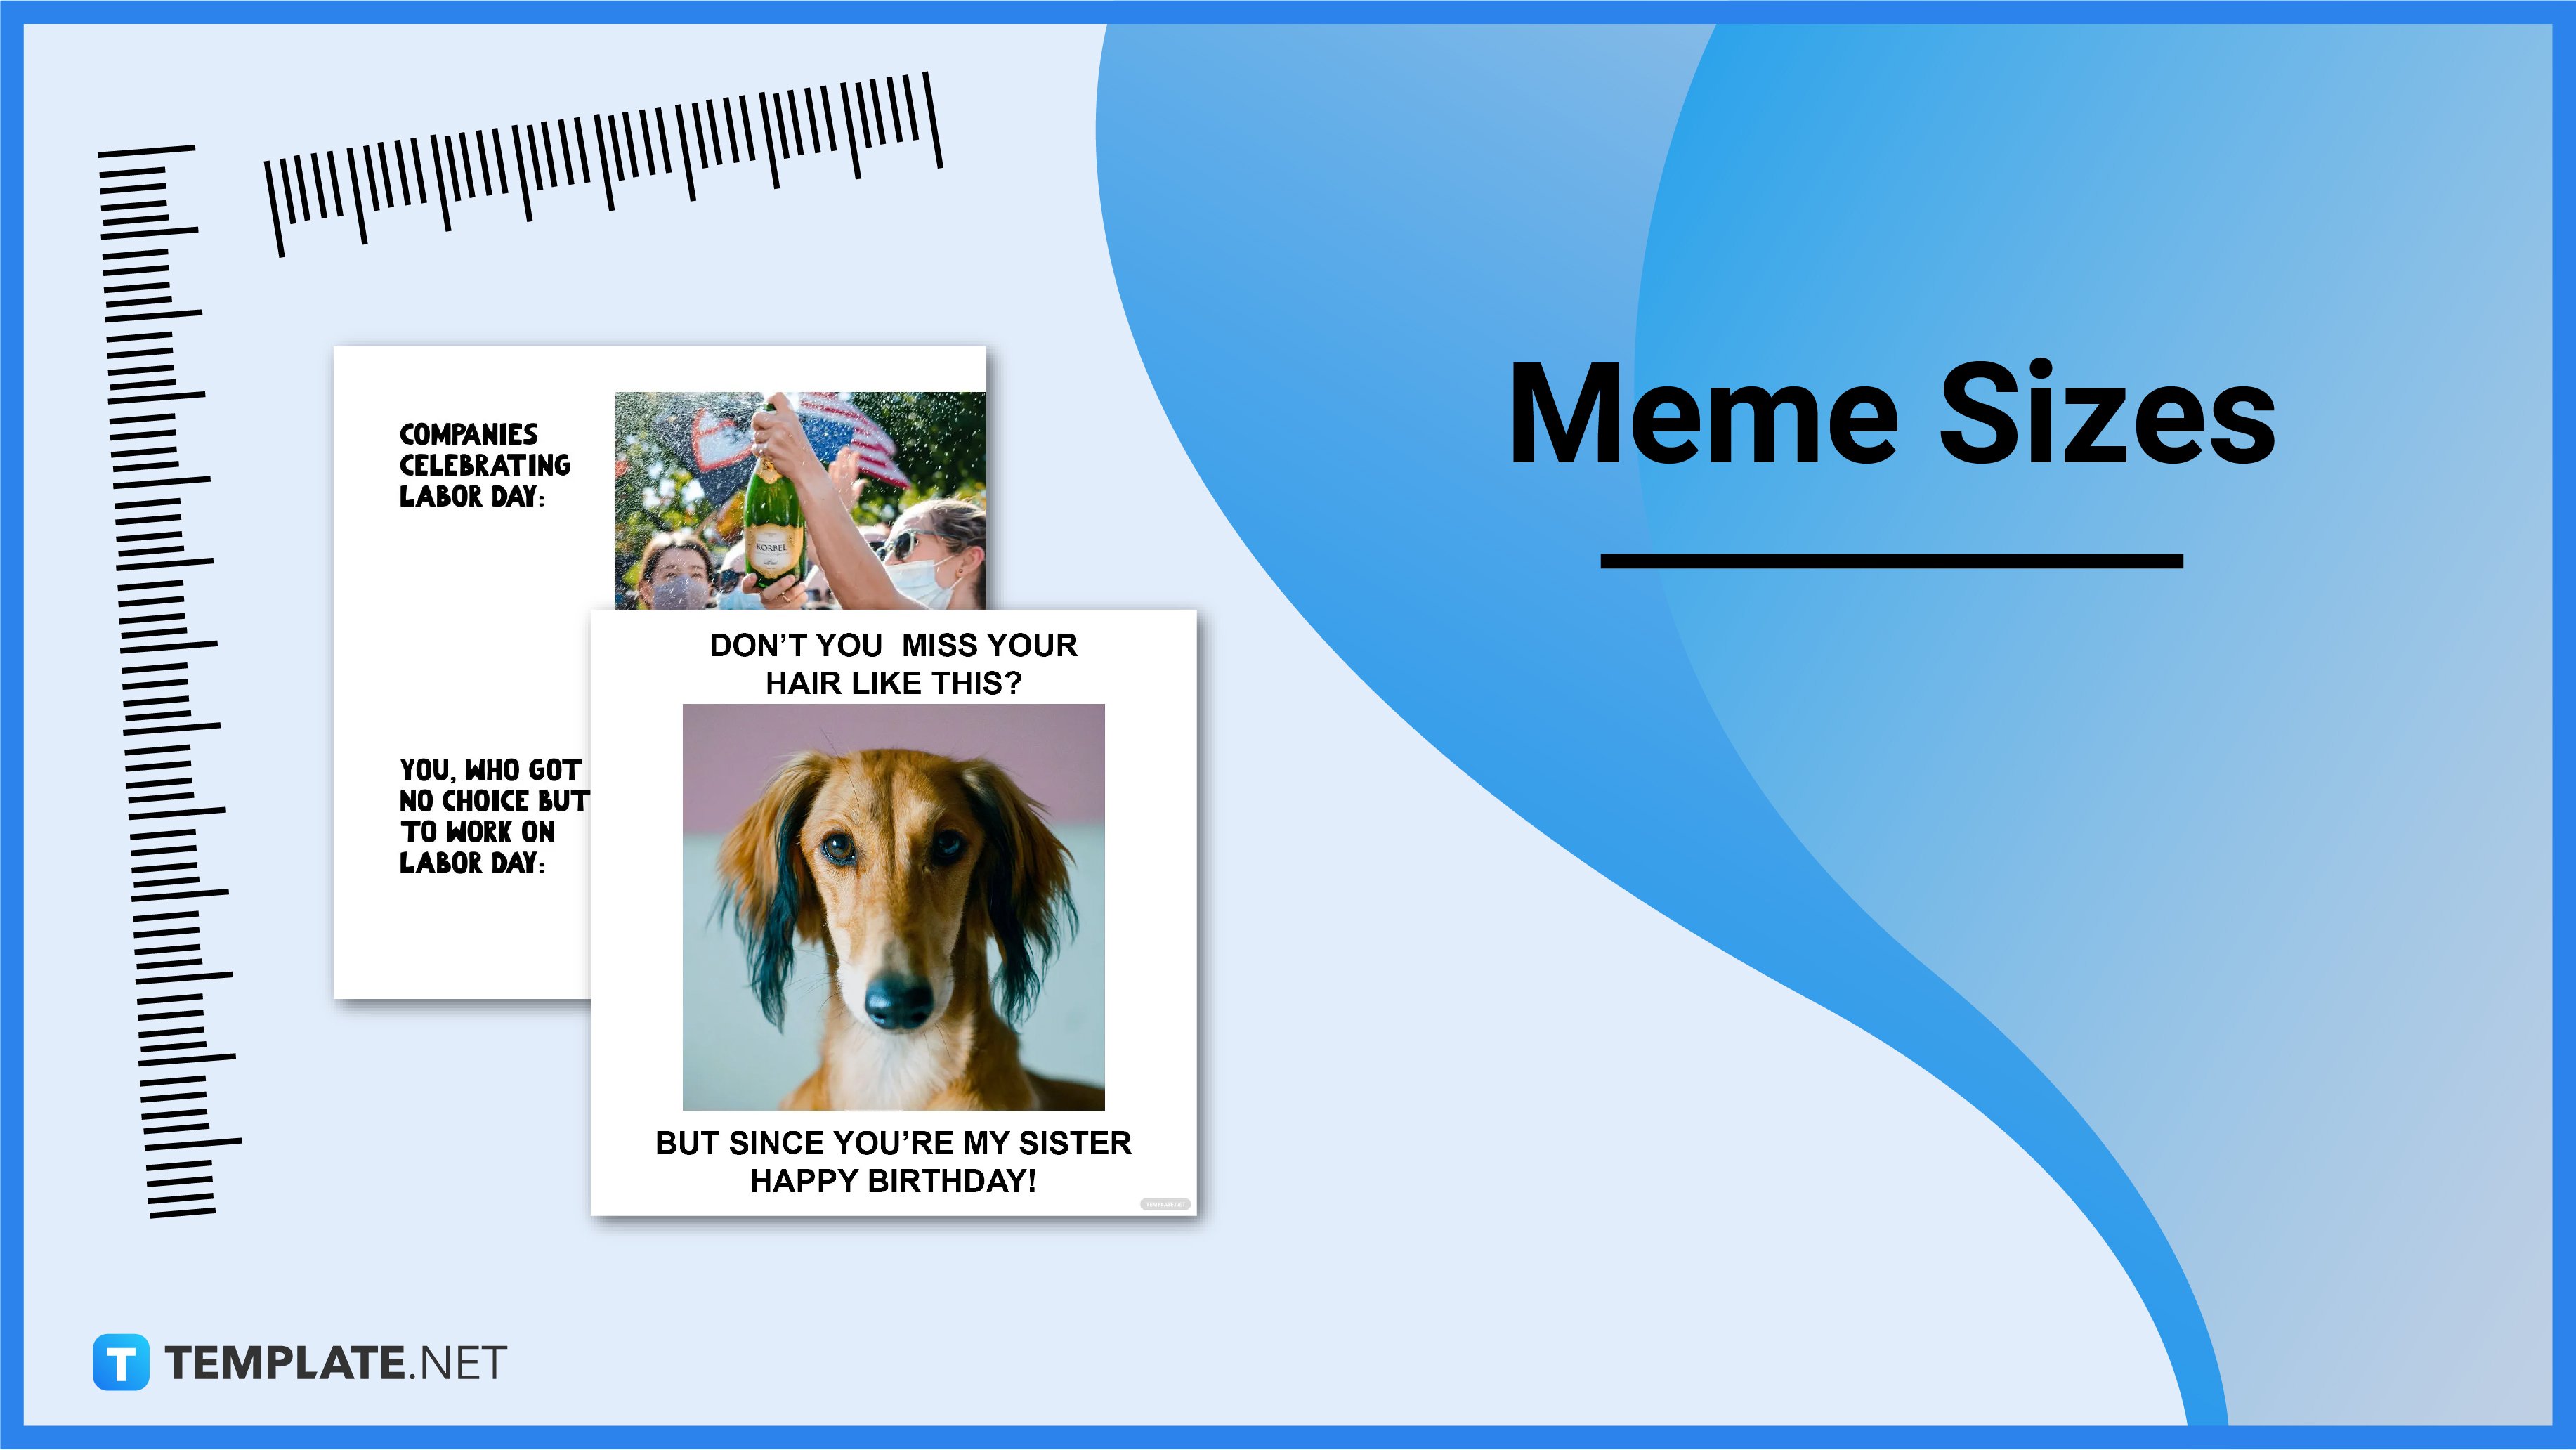 This is Make It Meme, the game in which you must create and evaluate memes  